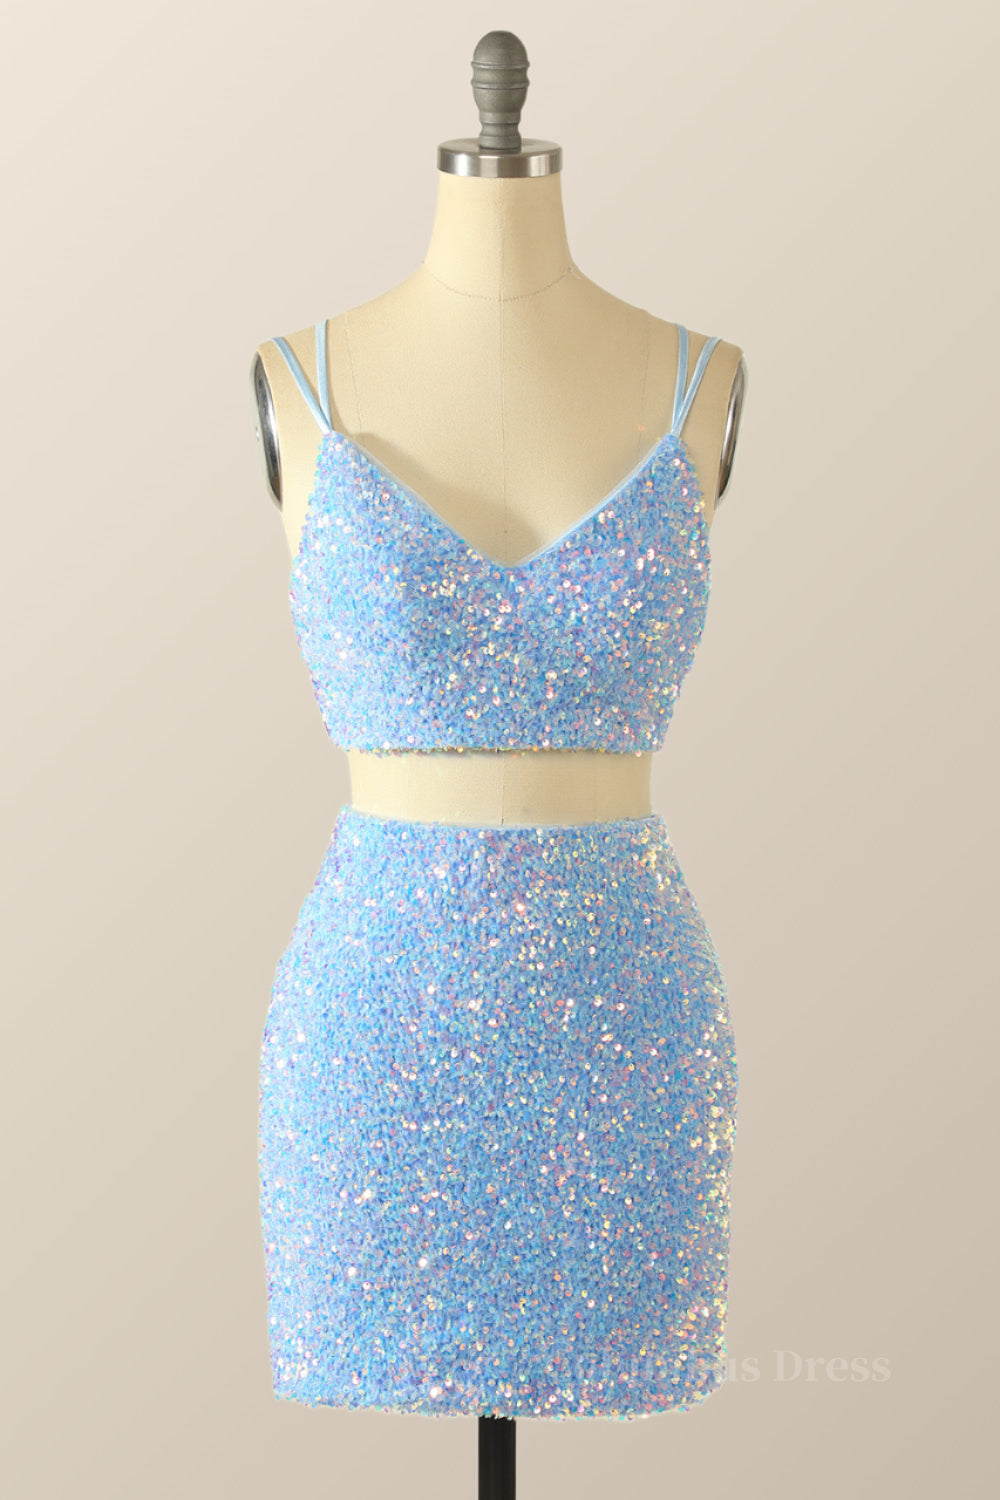 Homecomeing Dresses Bodycon, Two Piece Blue Sequin Tight Mini Dress